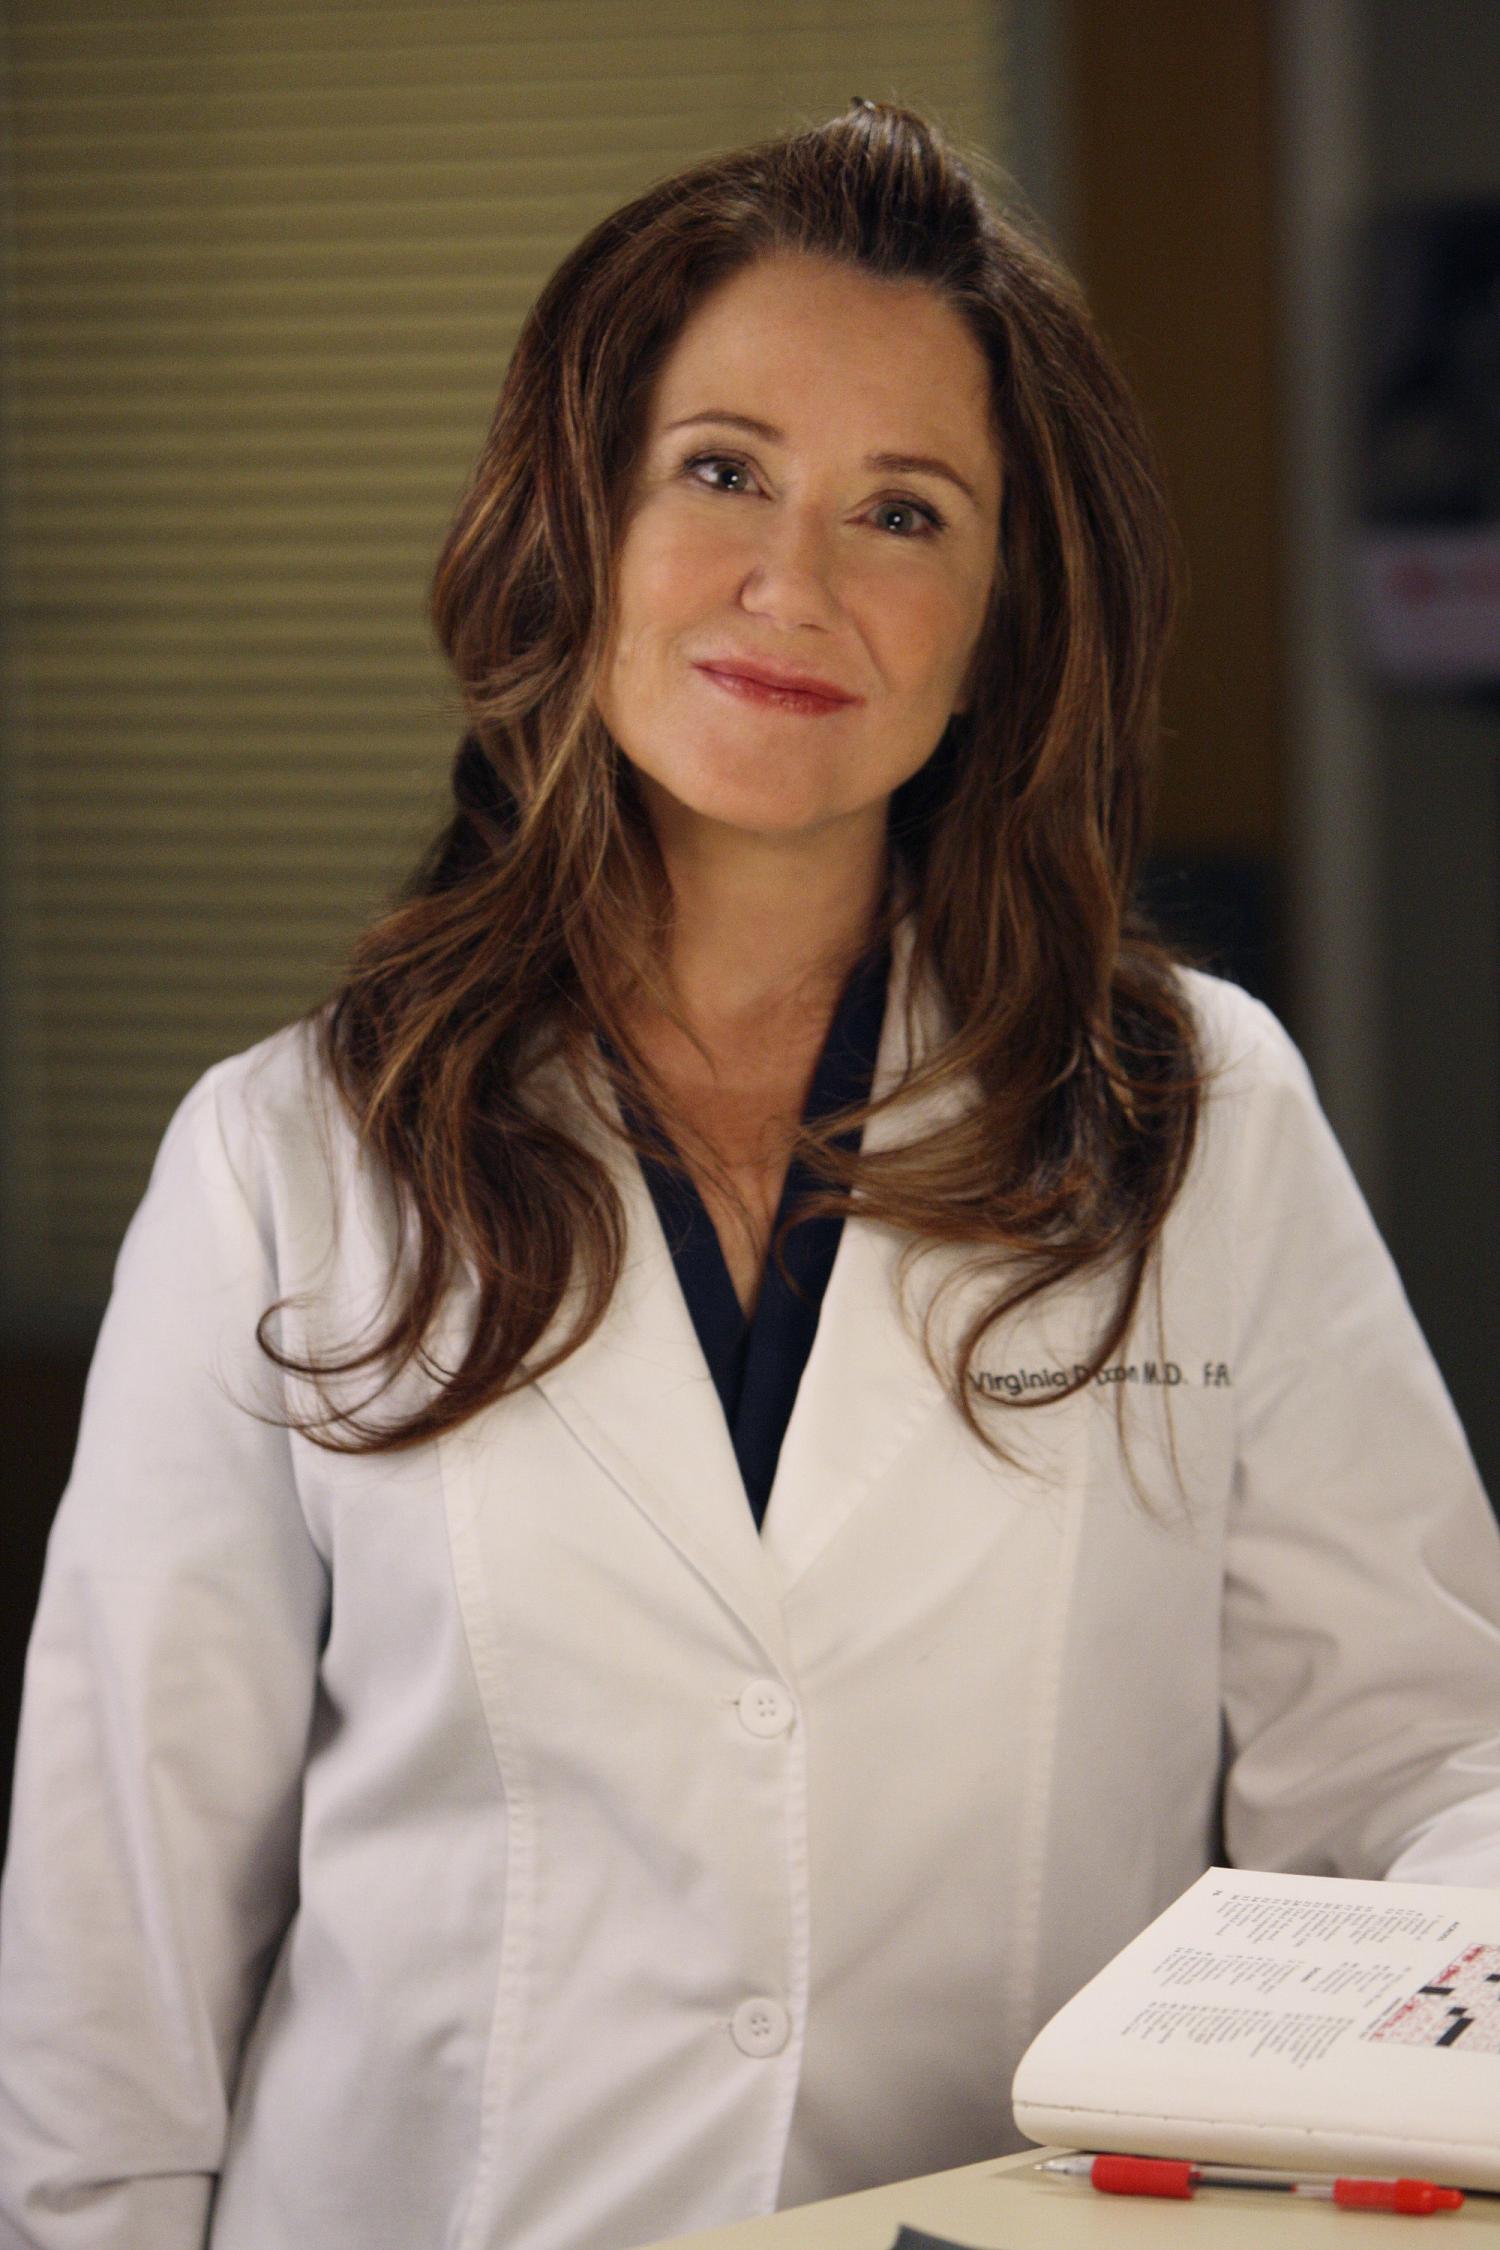 Virginia Dixon | Grey's Anatomy and Private Practice Wiki | FANDOM powered by Wikia